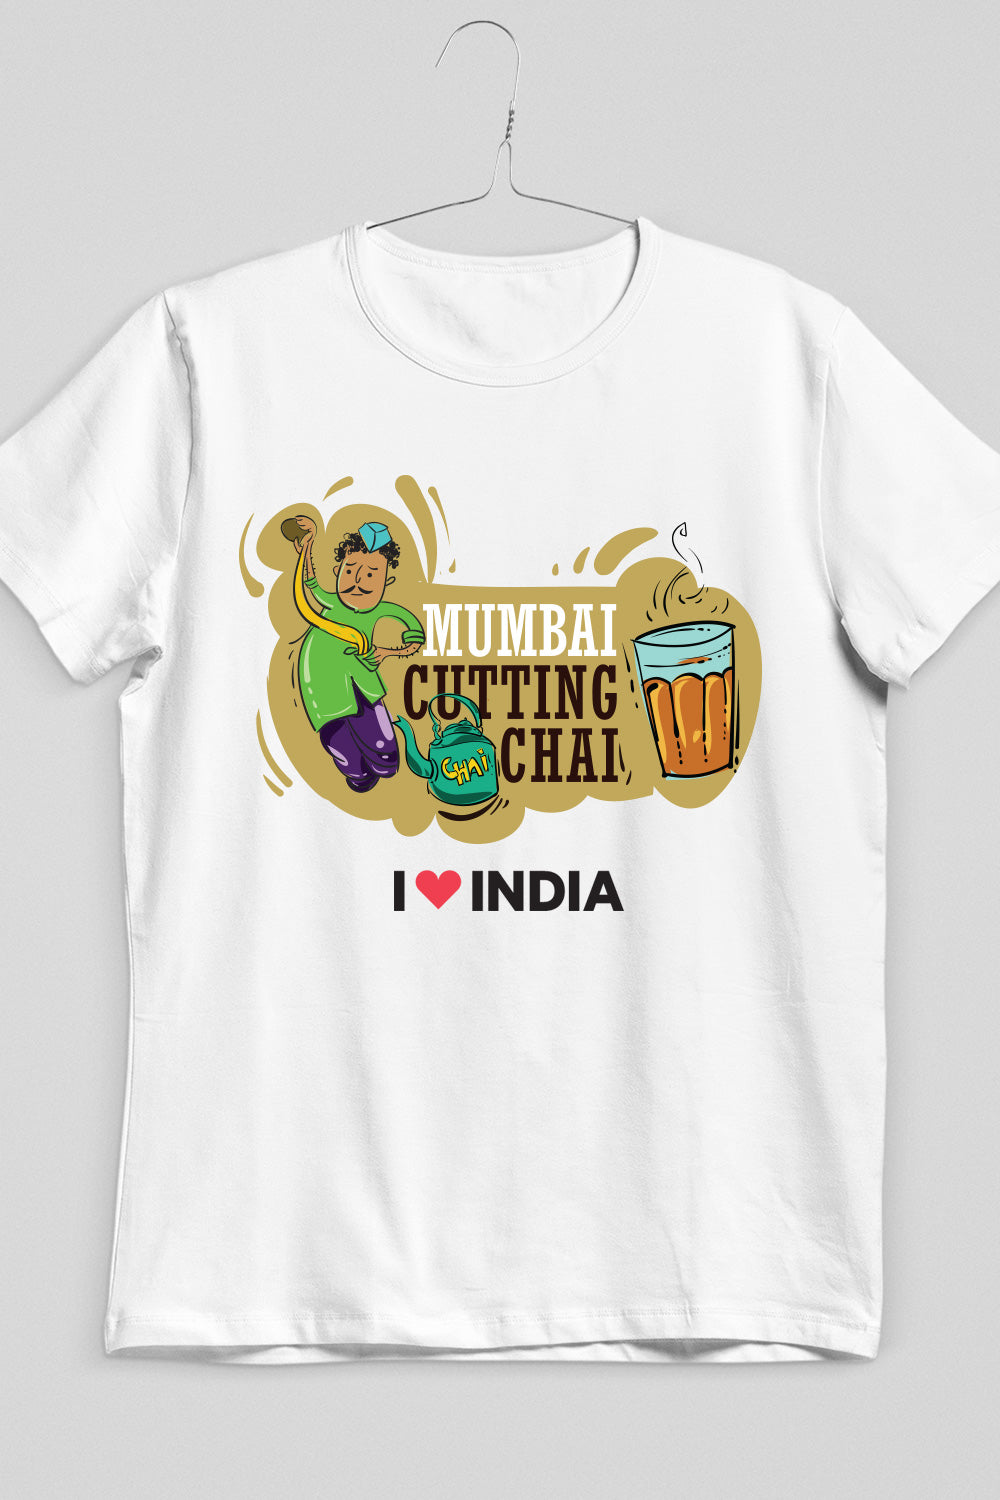 Mumbai Cutting Chai - Styched in India Graphic T-Shirt White Color